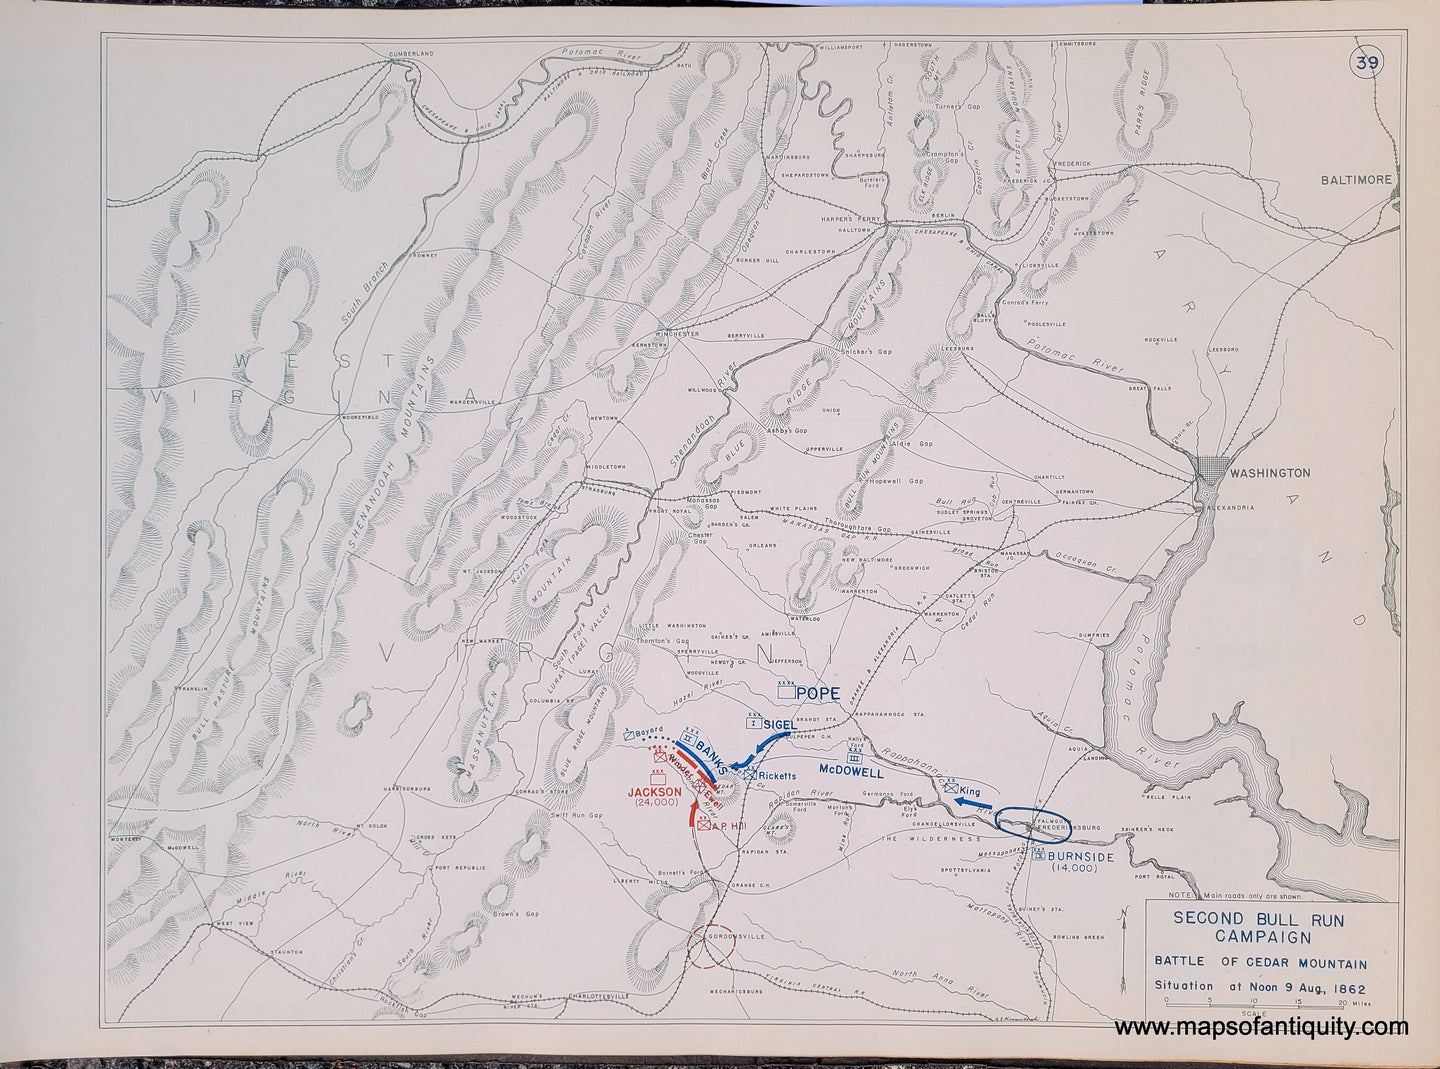 Genuine-Antique-Map-Second-Bull-Run-Campaign-Battle-of-Cedar-Mountain-Situation-at-Noon-9-Aug--1862-1948-Matthew-Forney-Steele-Dept-of-Military-Art-and-Engineering-US-Military-Academy-West-Point-Maps-Of-Antiquity